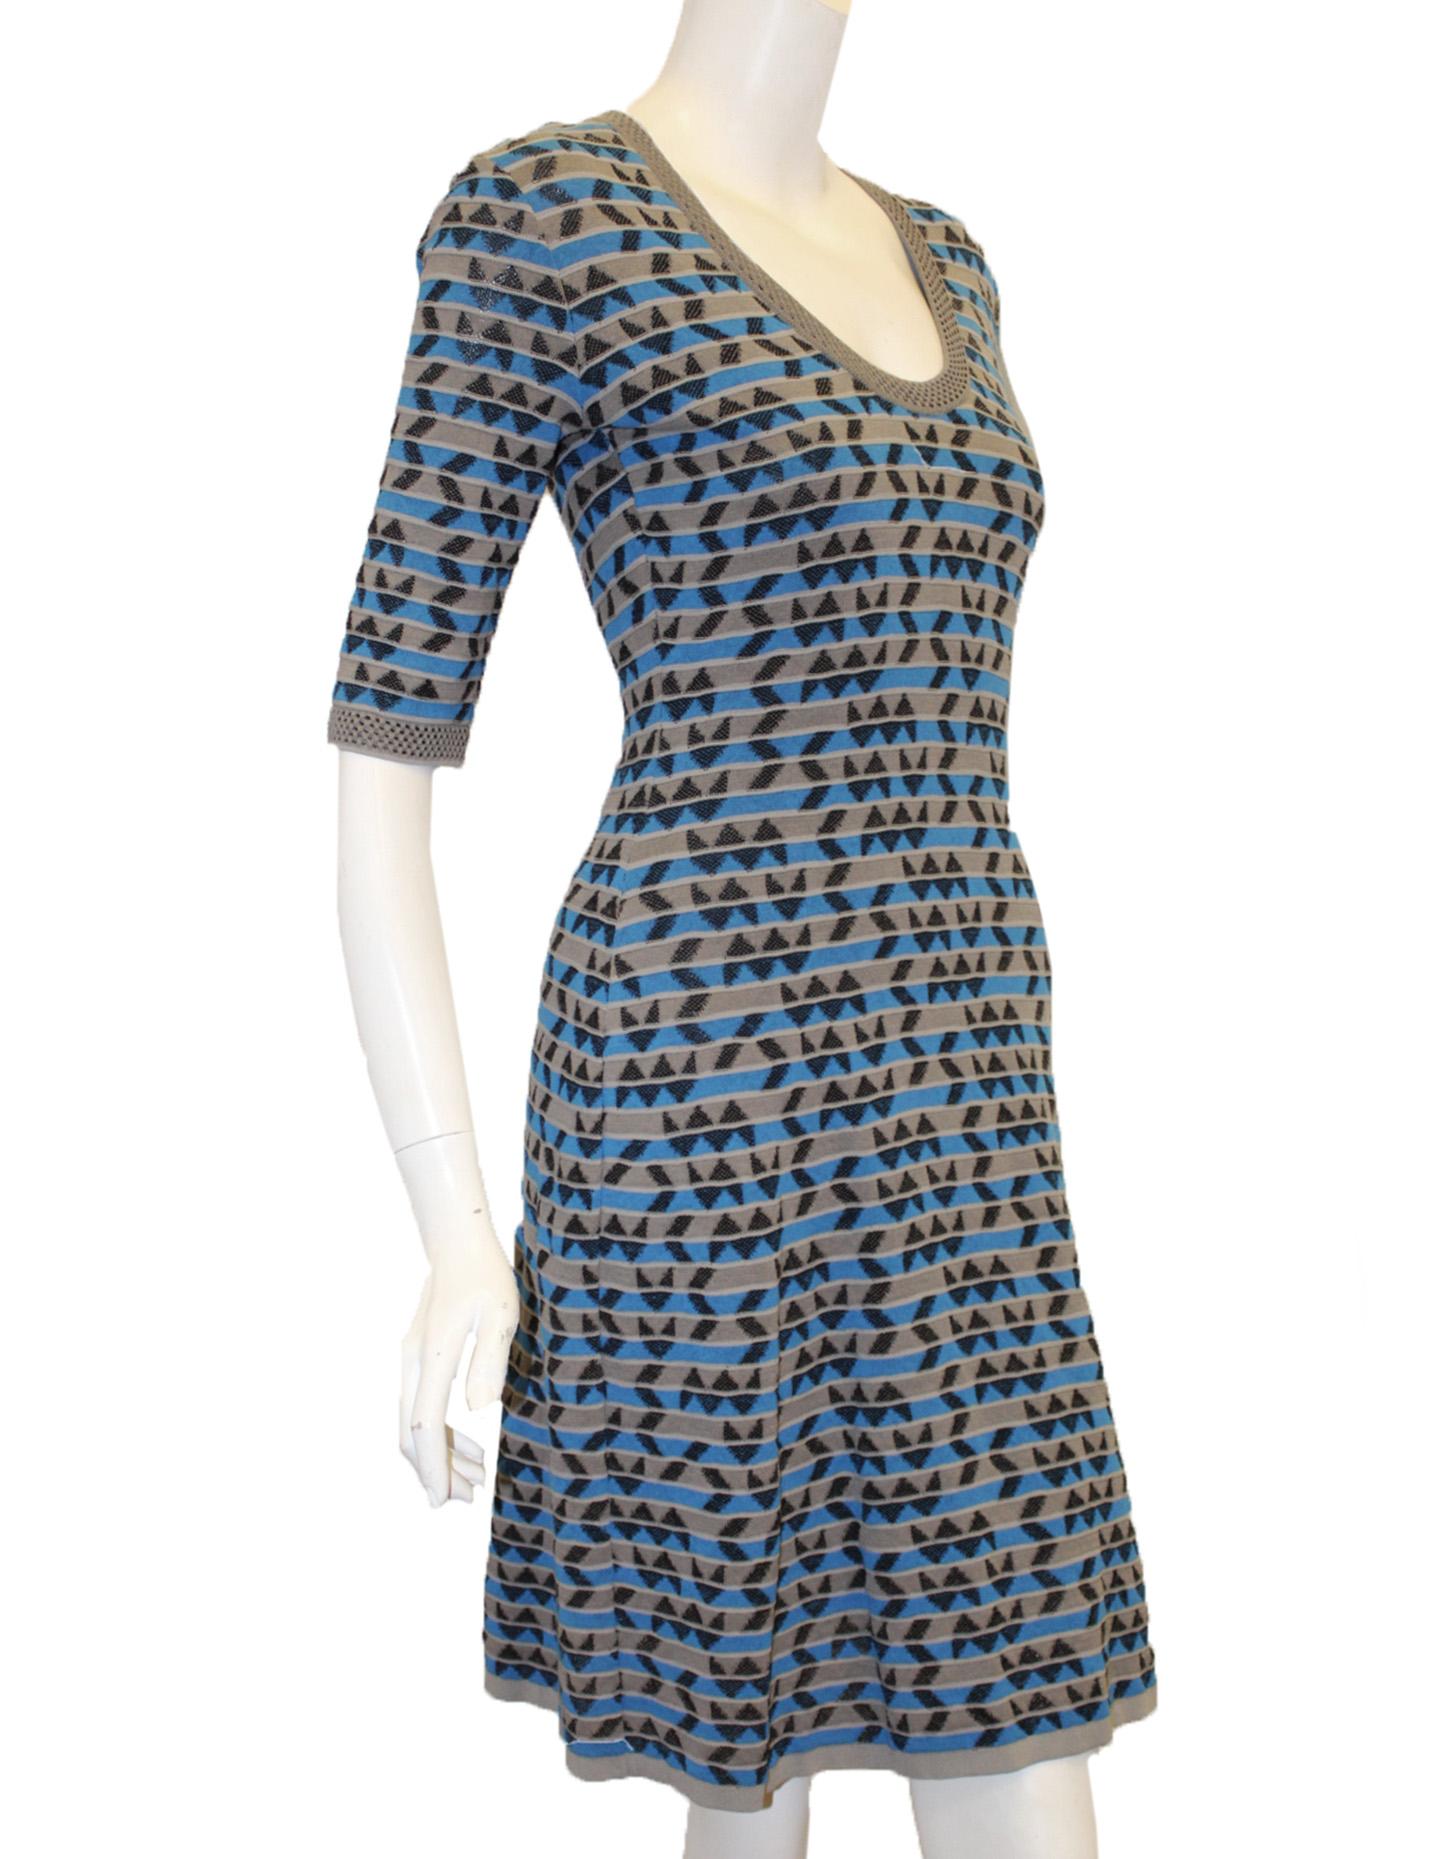 Missoni multi color modern geometric design dress in grey, turquoise and black contains a grey trim scoop neck and elbow length sleeves is your perfect companion for these warm summer days and night.  This easy to wear and travel with dress has a